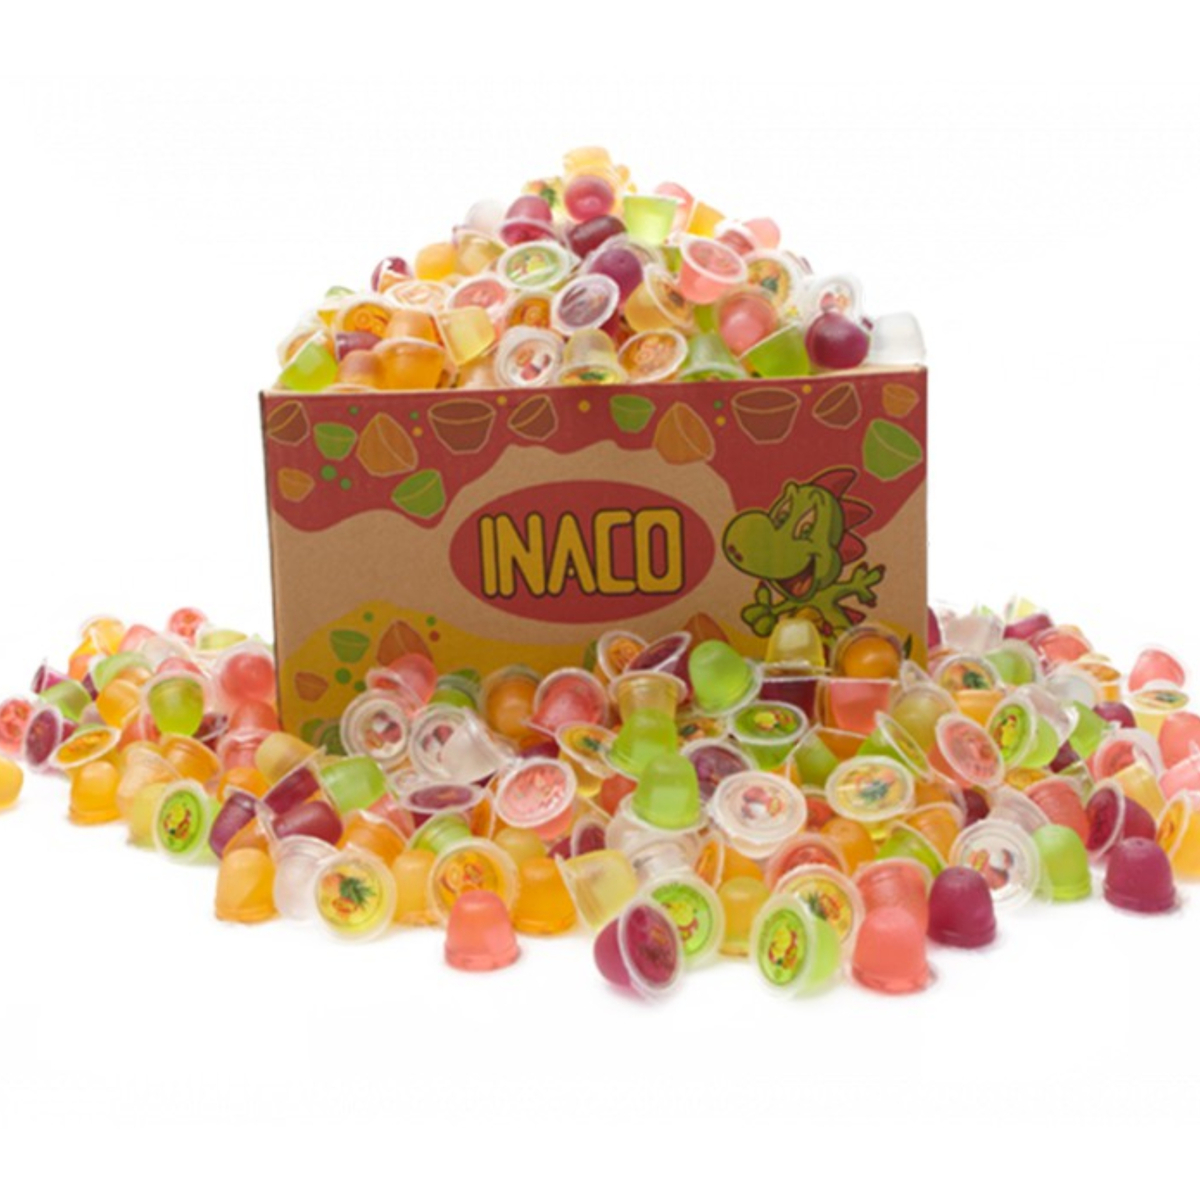 Inaco Jelly Assorted 1Kg